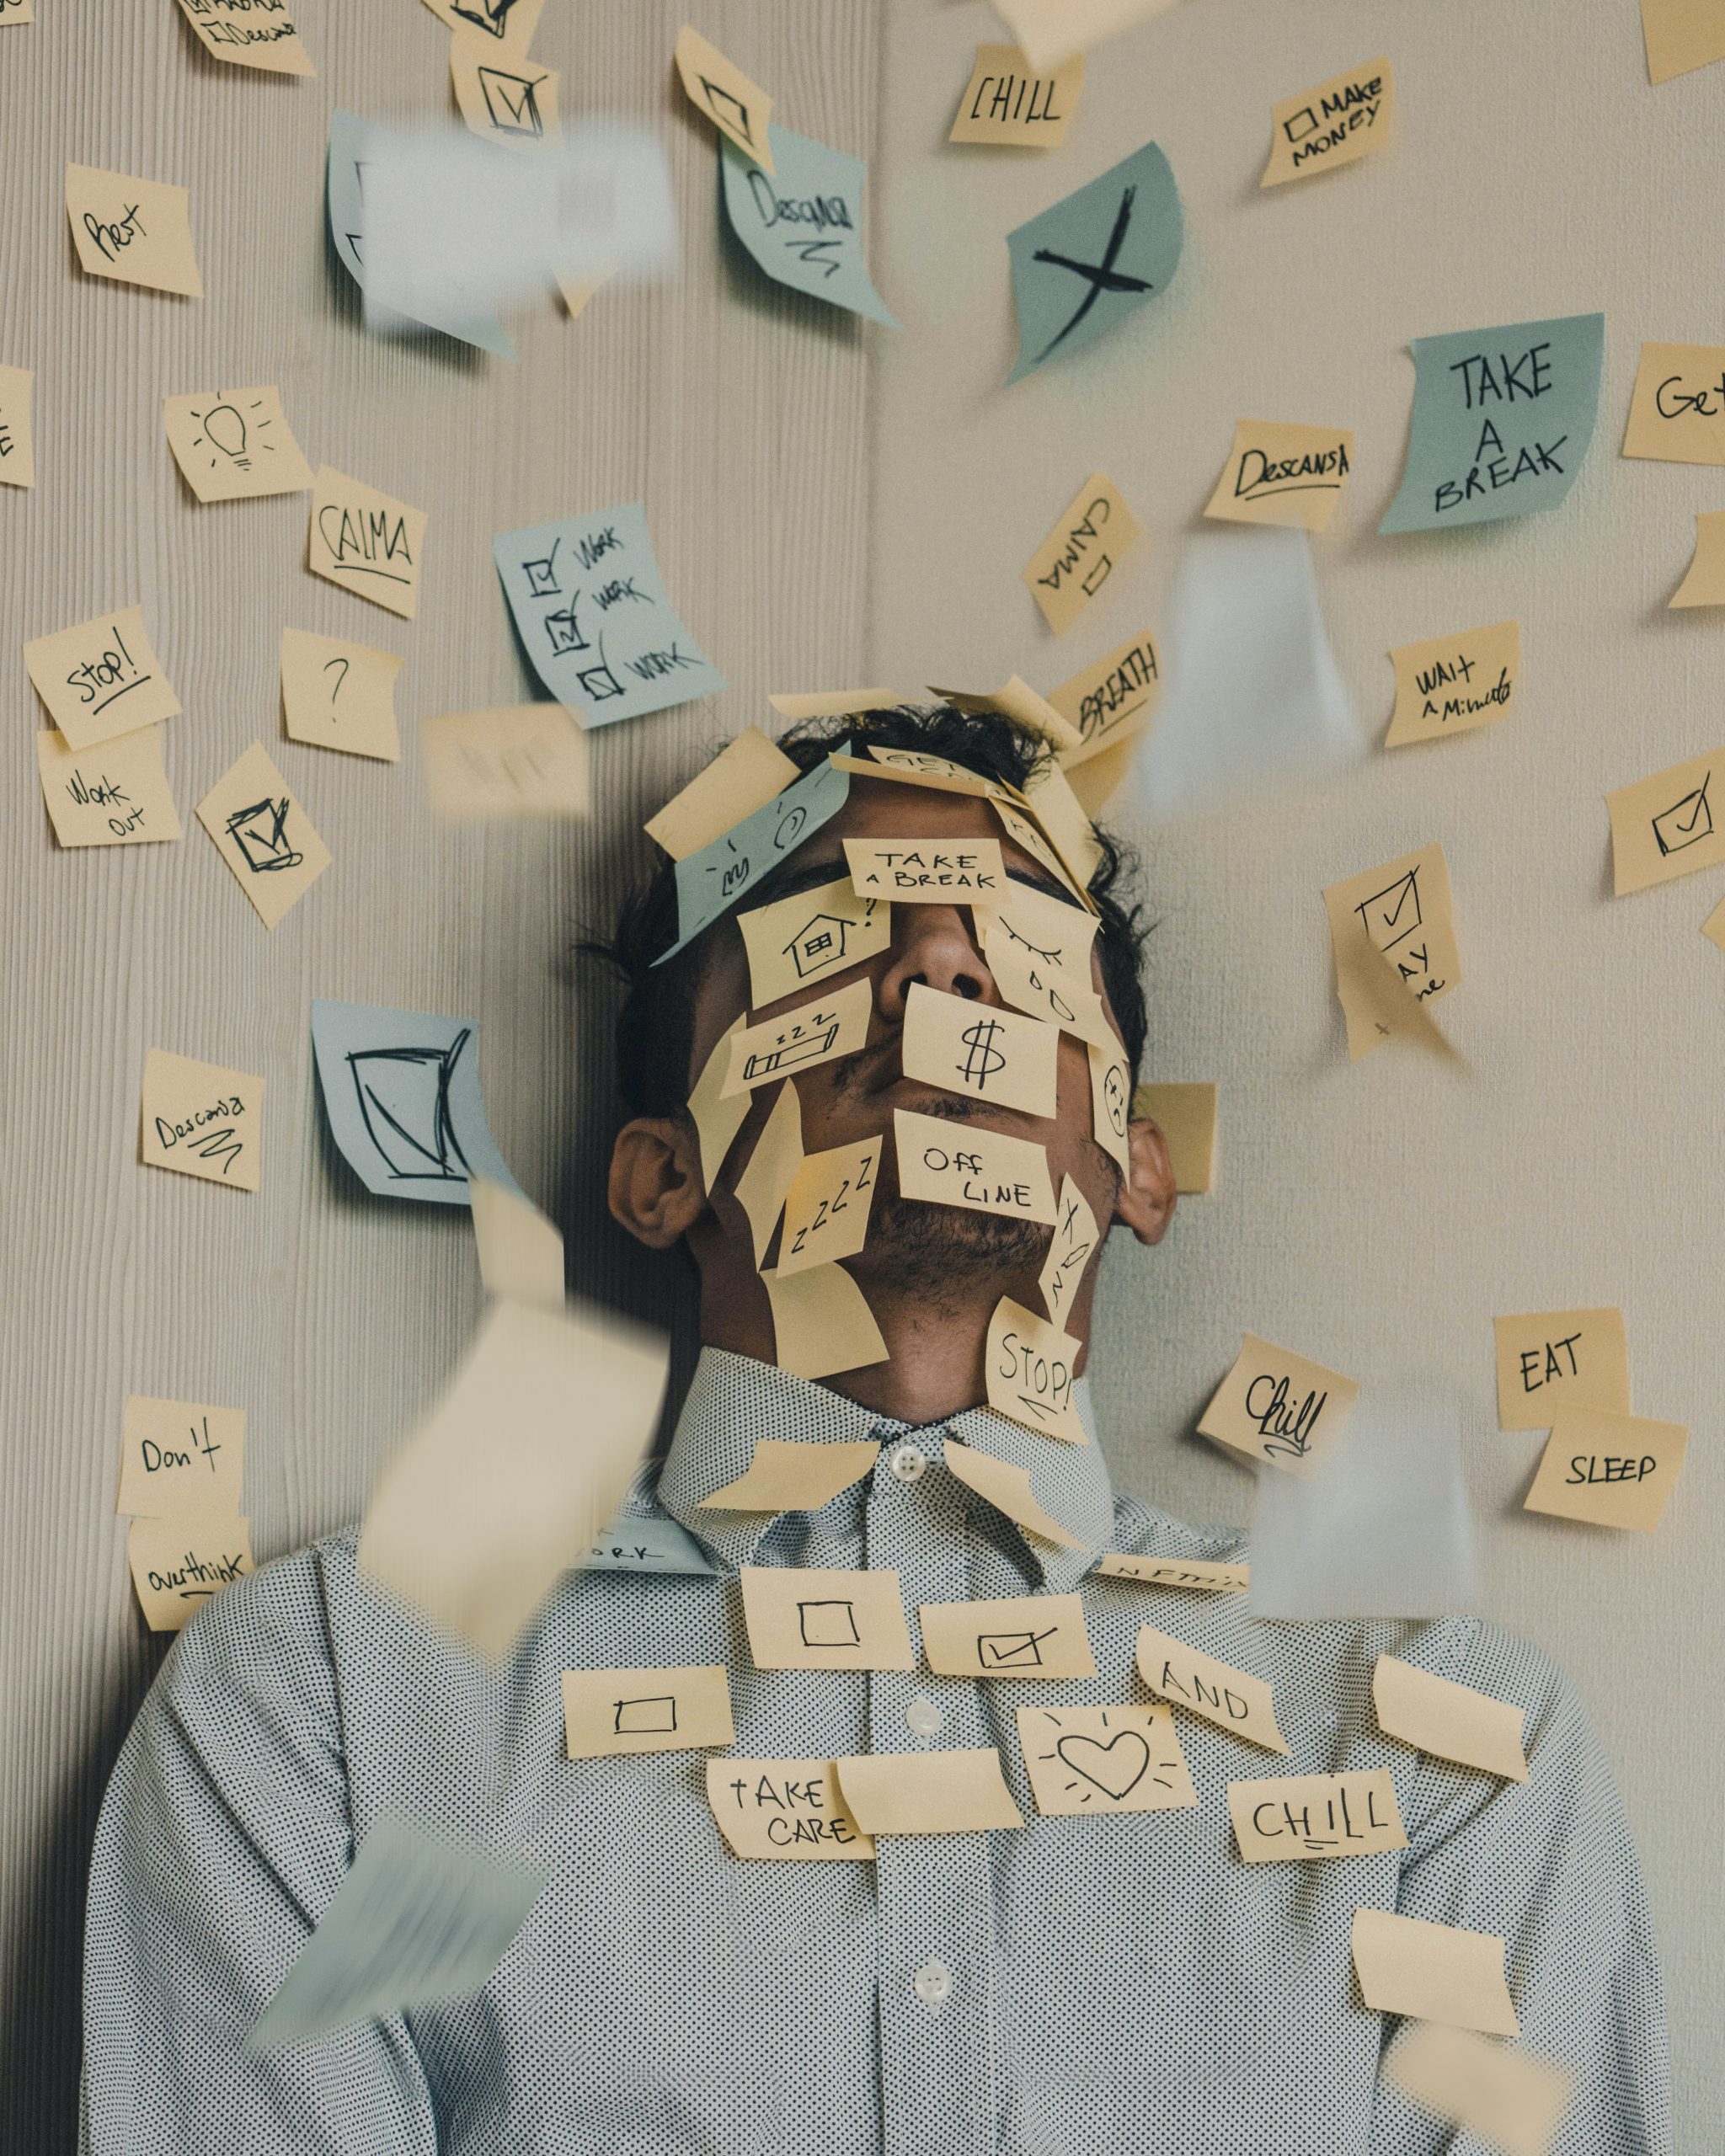 A man covered completely in "to do" post-it notes.